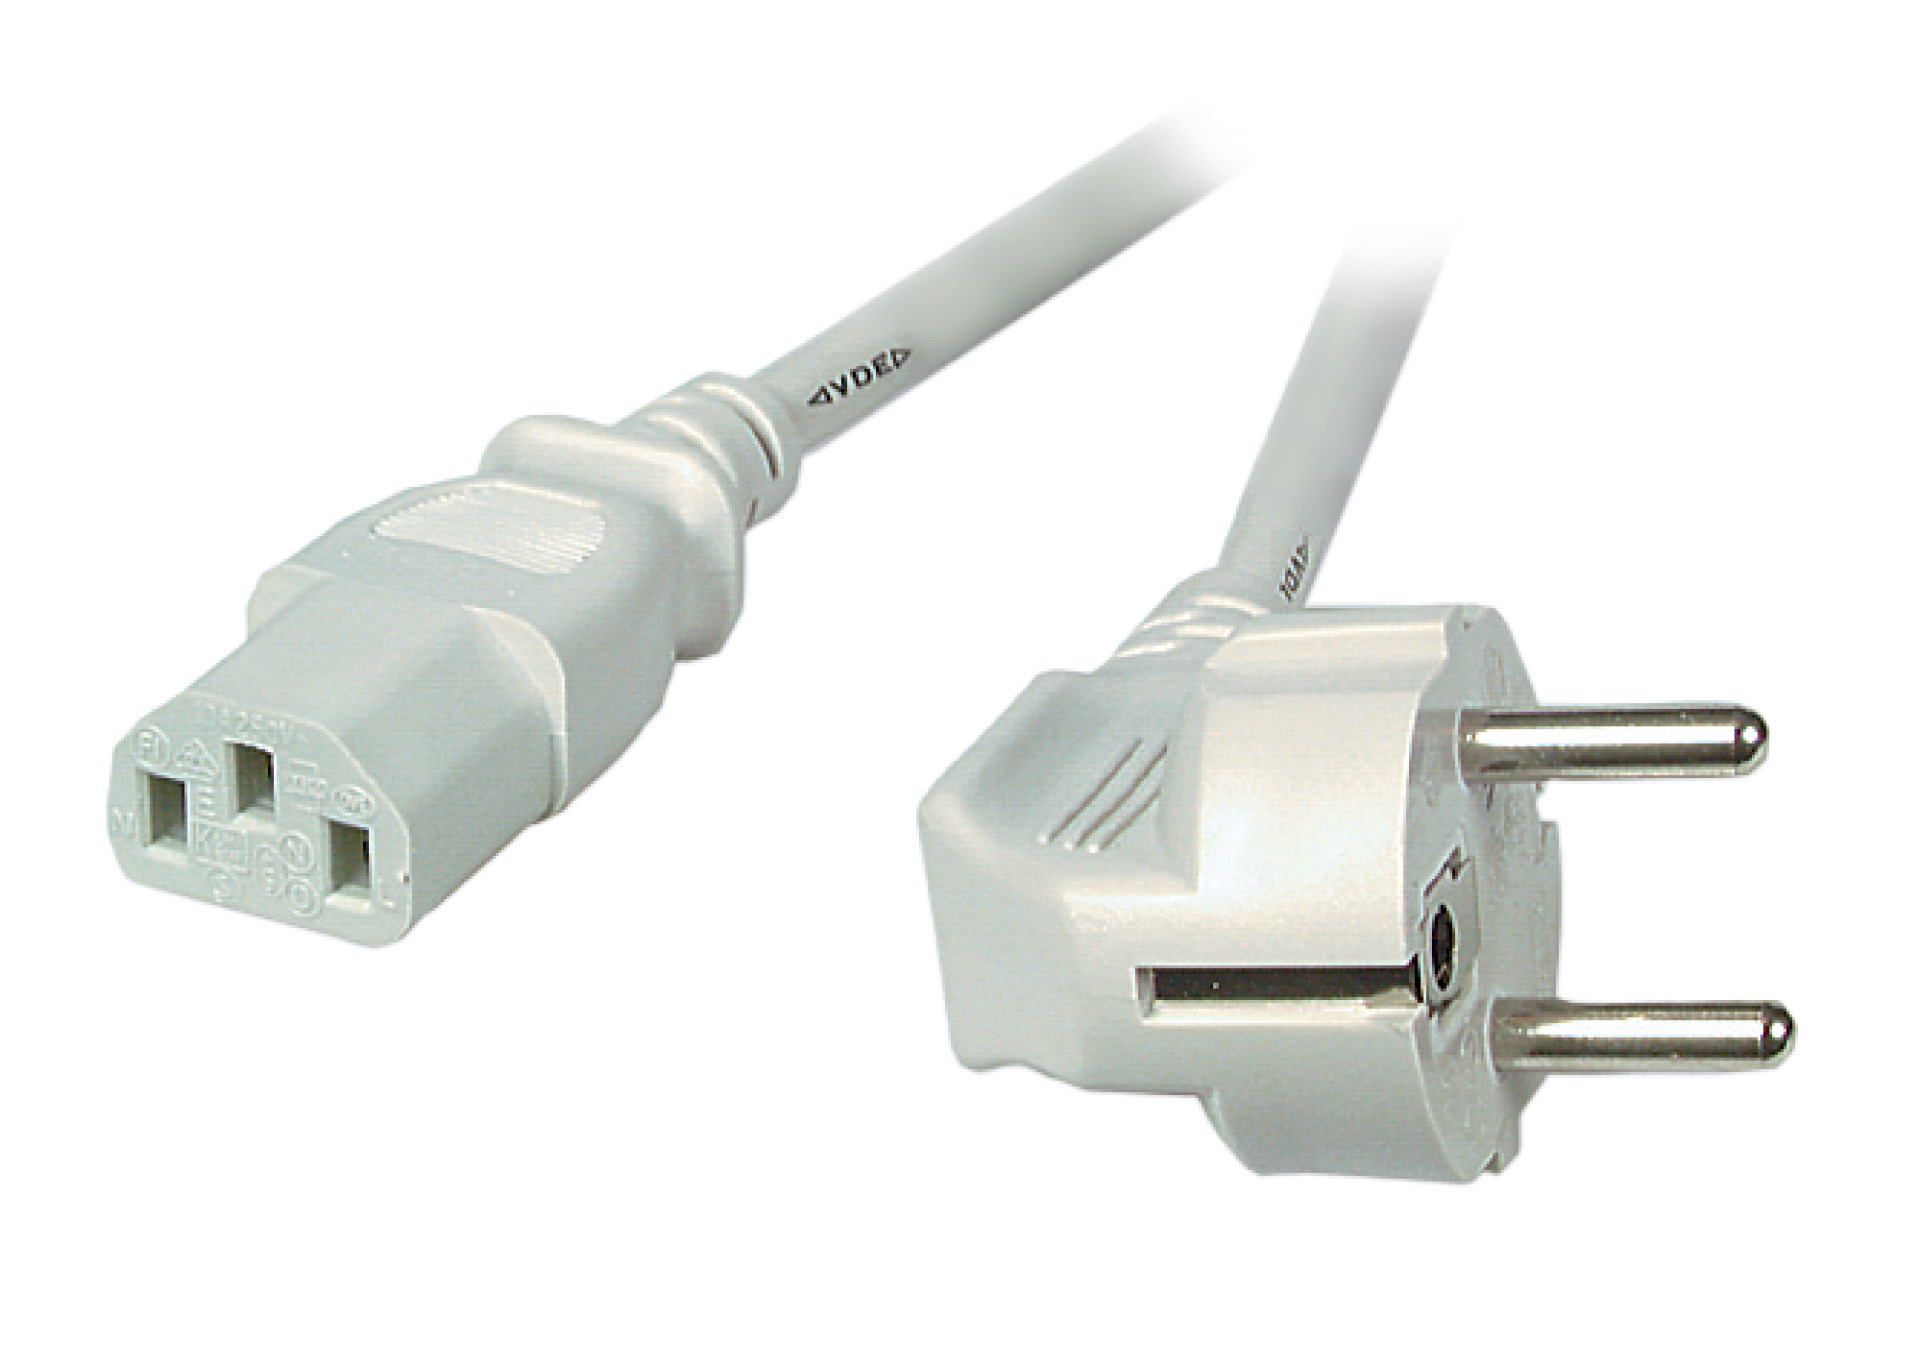 Power Cable CEE7/7 90° - C13 180°, Grey, 5 m, 3 x 1.00 mm²